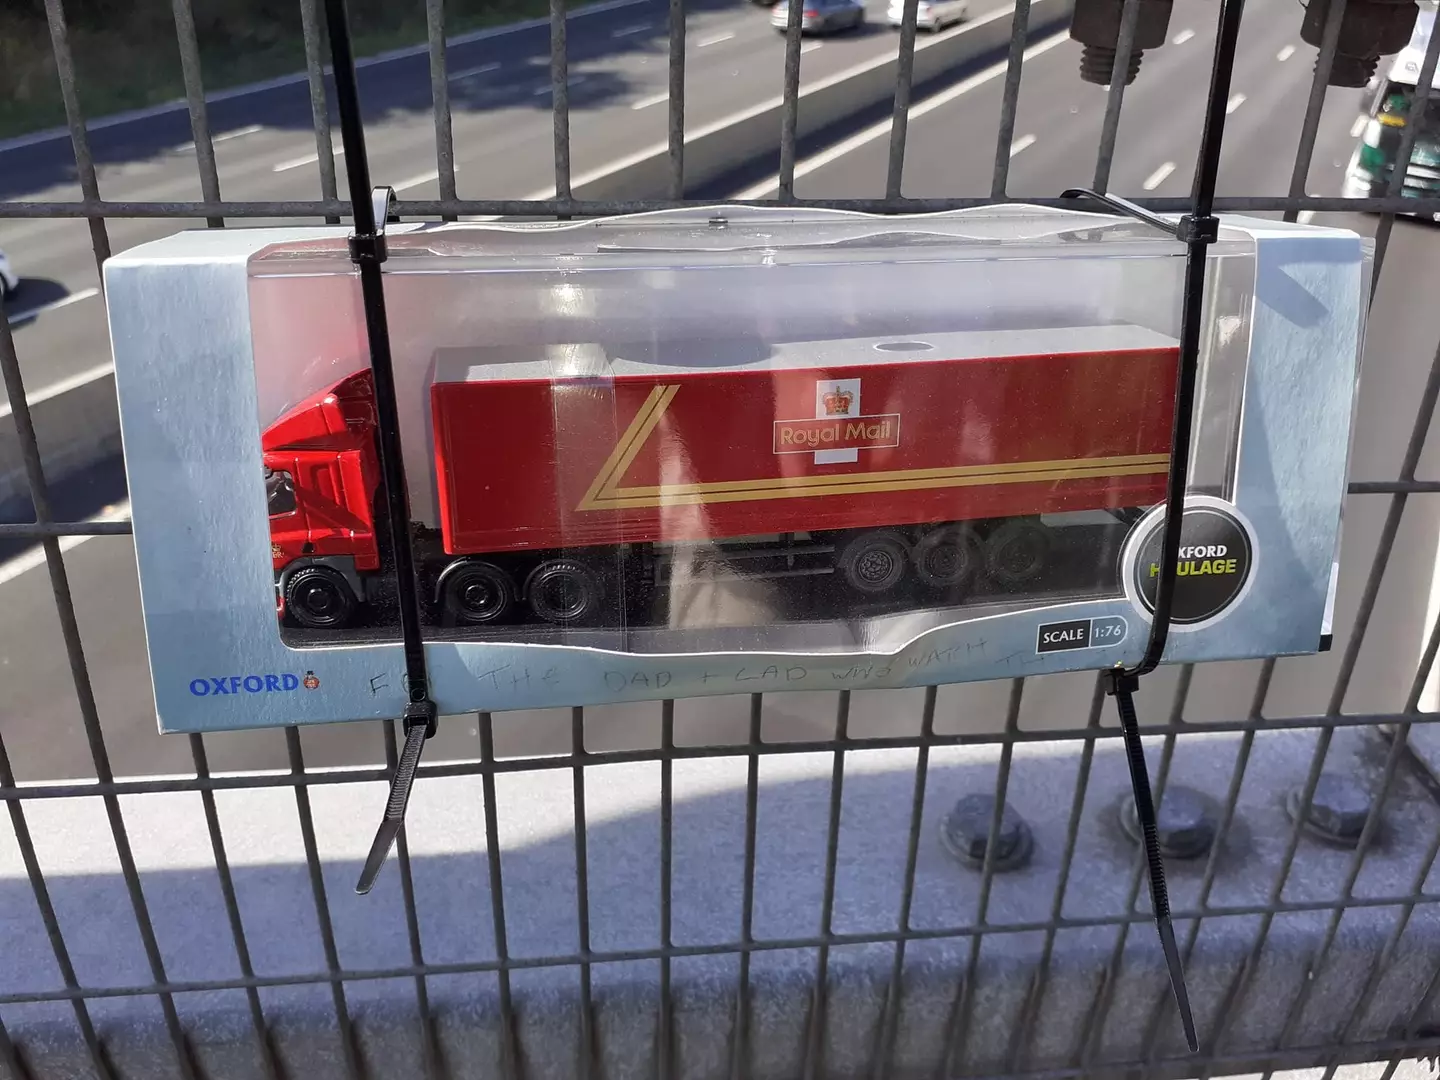 A Royal Mail driver left a toy truck for Alex as a thank you for waving as he drove by so often.